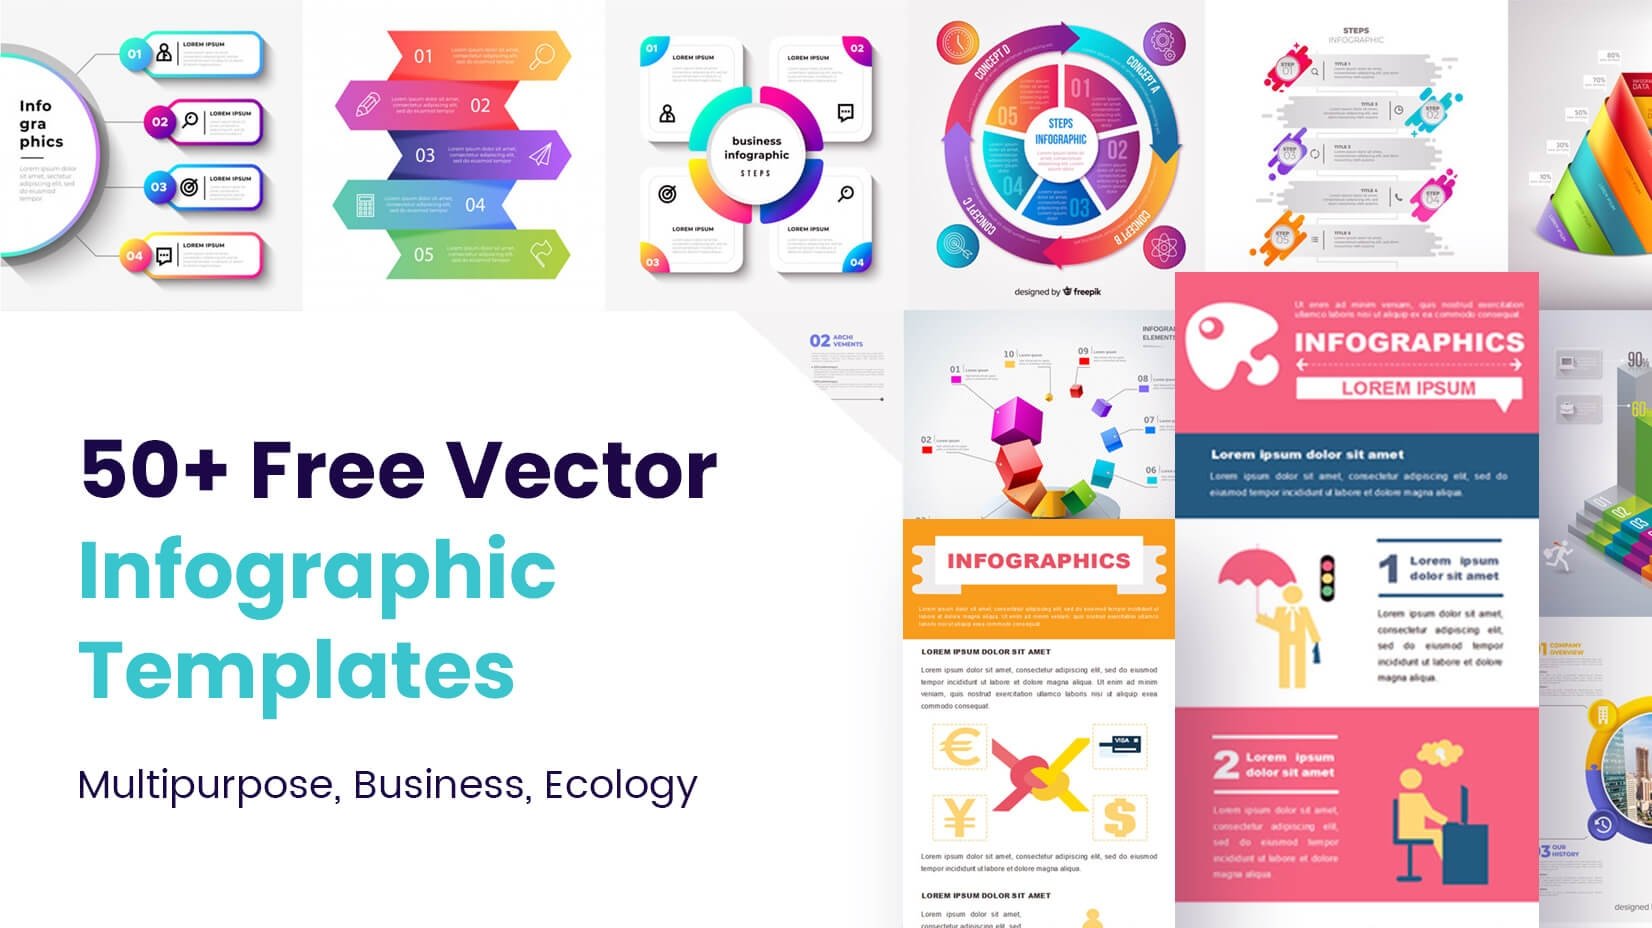 50 Free Vector Infographic Templates Multipurpose Business Ecology GraphicMama Blog